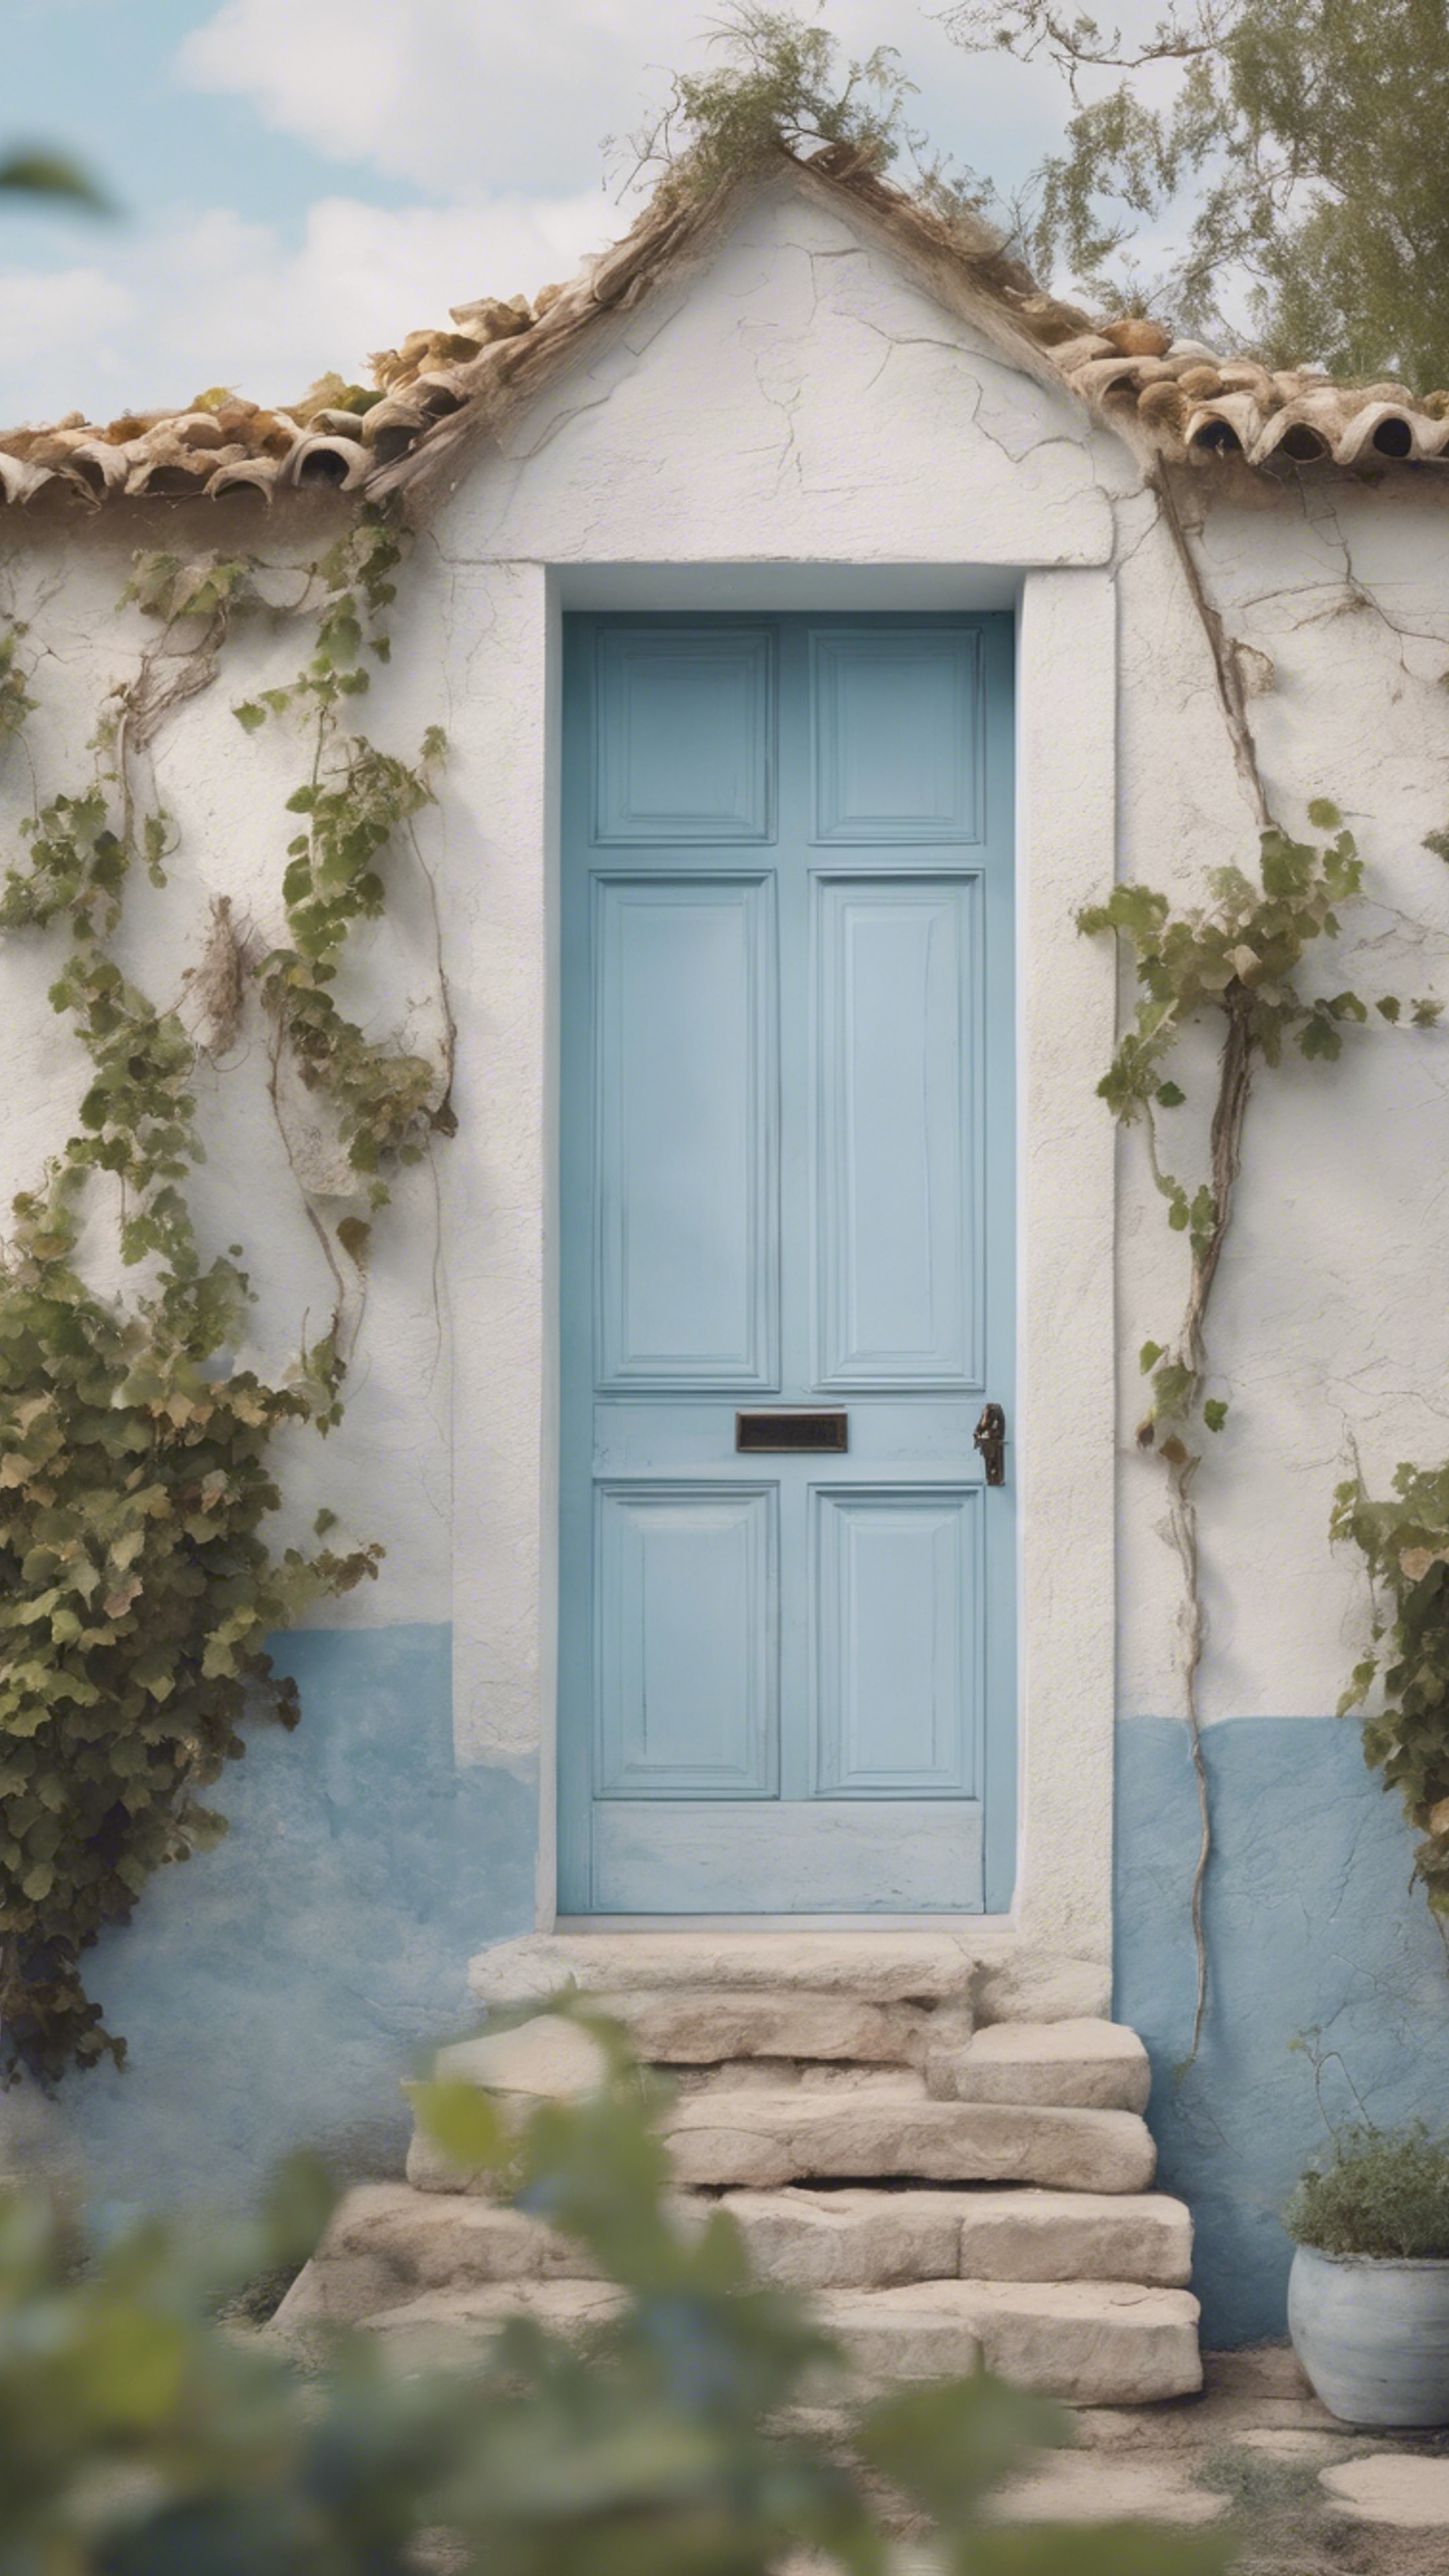 A pastel blue painted door on a rustic white house, a vineyard in the background. Валлпапер[5cba61123f91494ab86f]